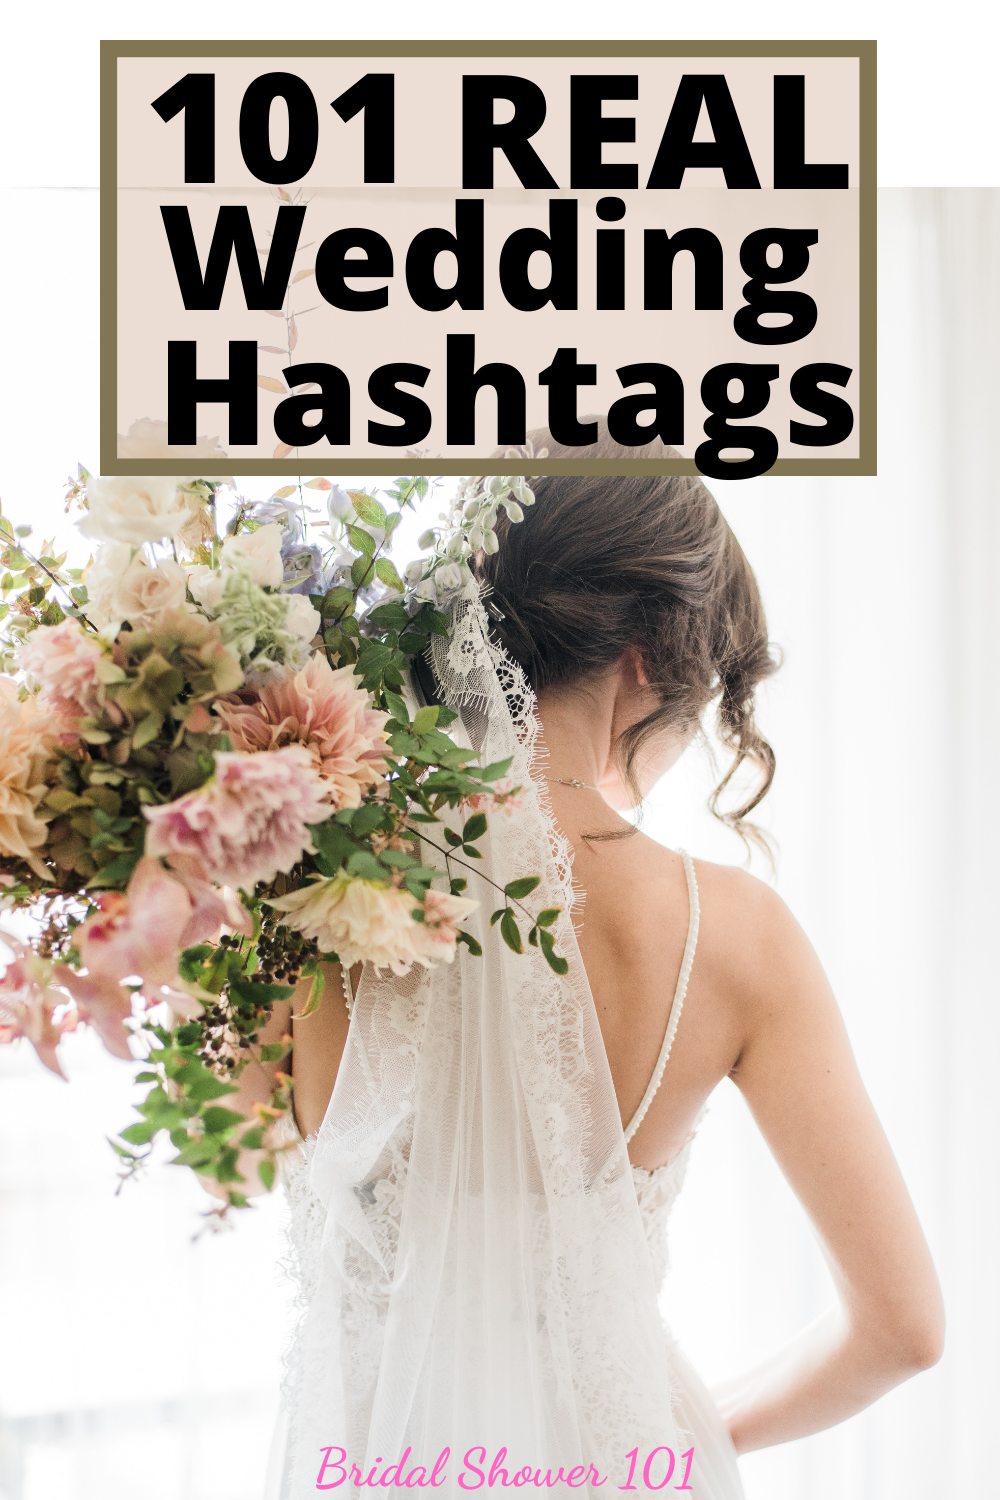 101 Wedding Hashtags From Real Brides Bridal Shower 101